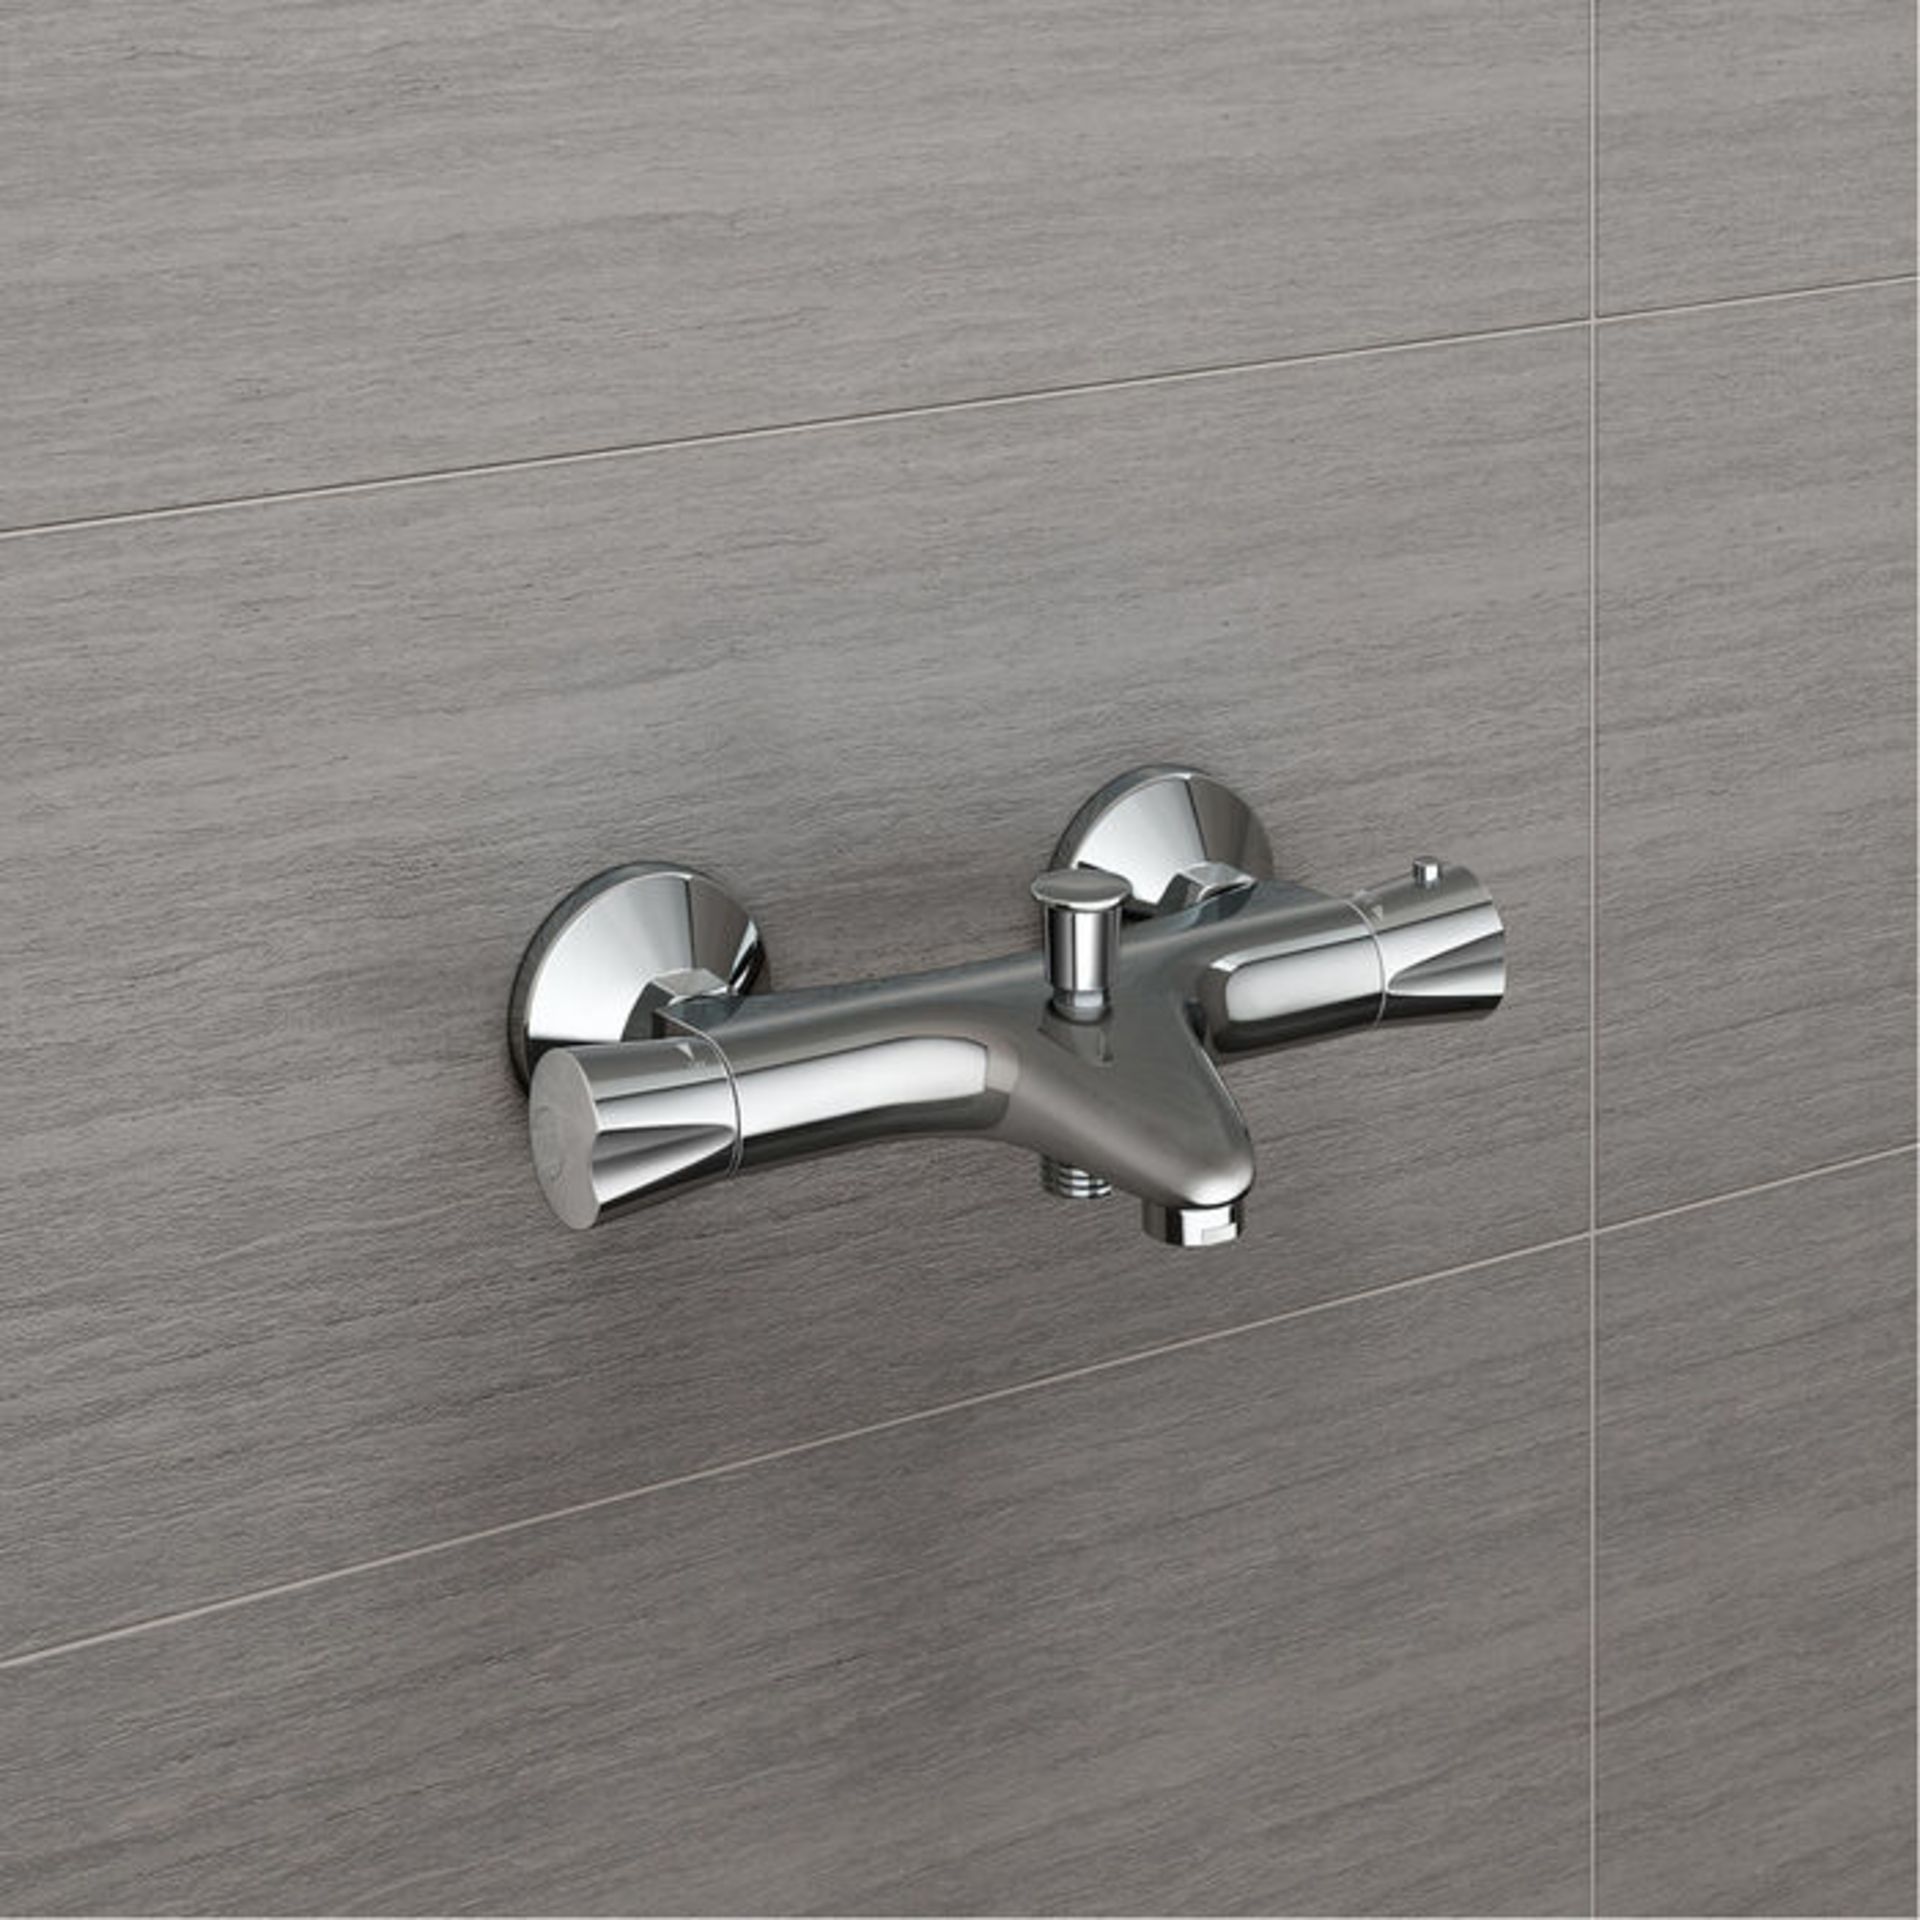 (RK1027) Shower Mixer Valve with Bath Filler. Rrp £192.99. Chrome Plated Solid Brass Mixer Th... - Image 2 of 3